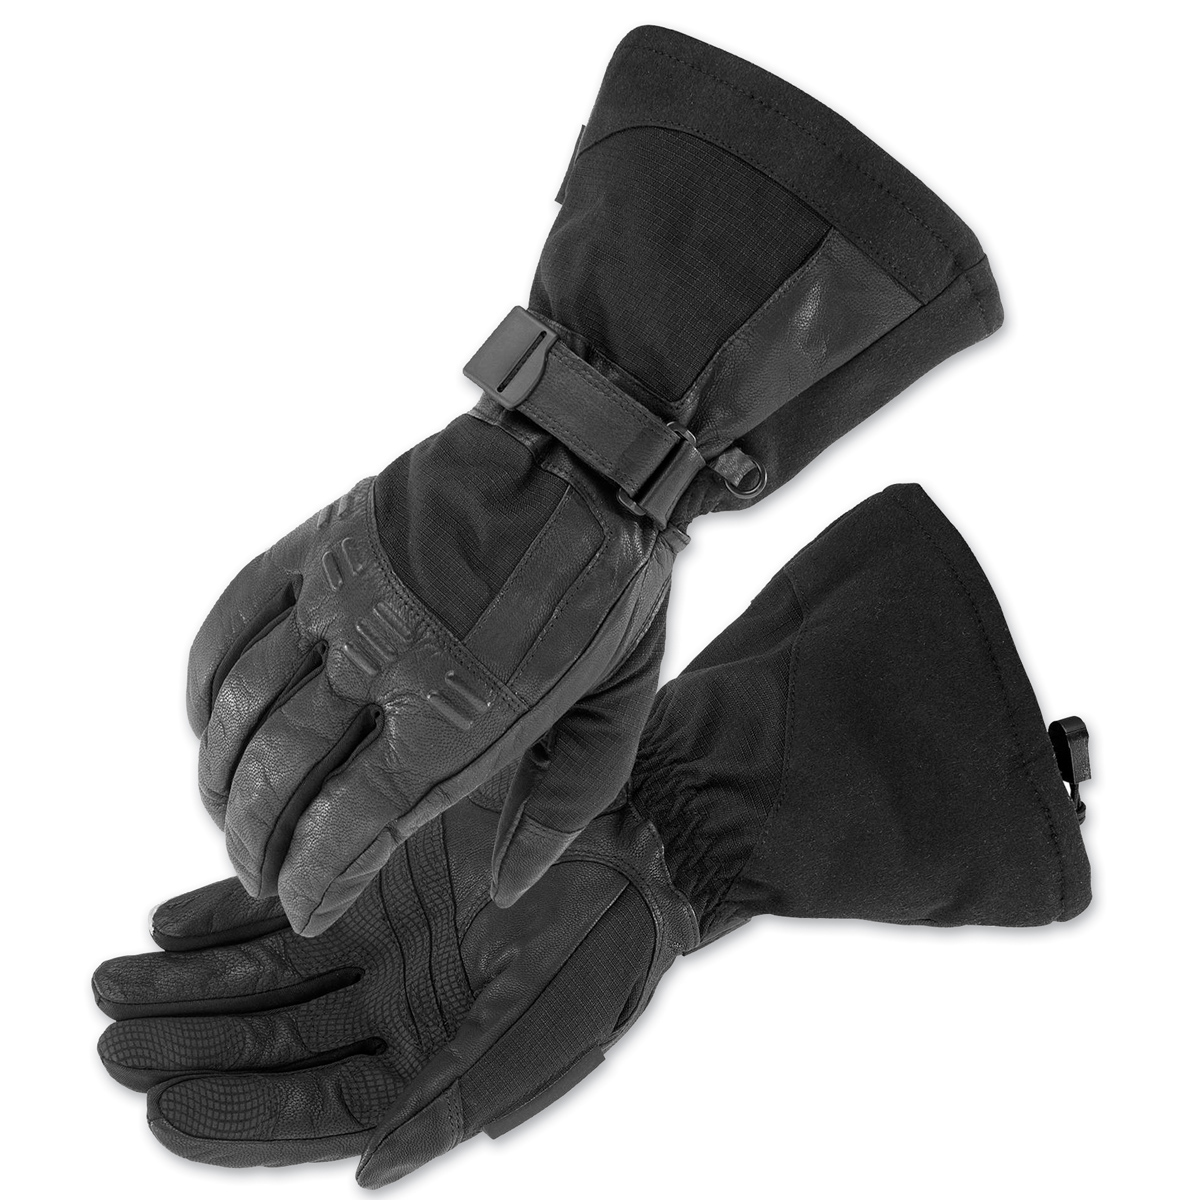 Hot sale black goat skin waterproof and windproof reflective motorcycles gloves